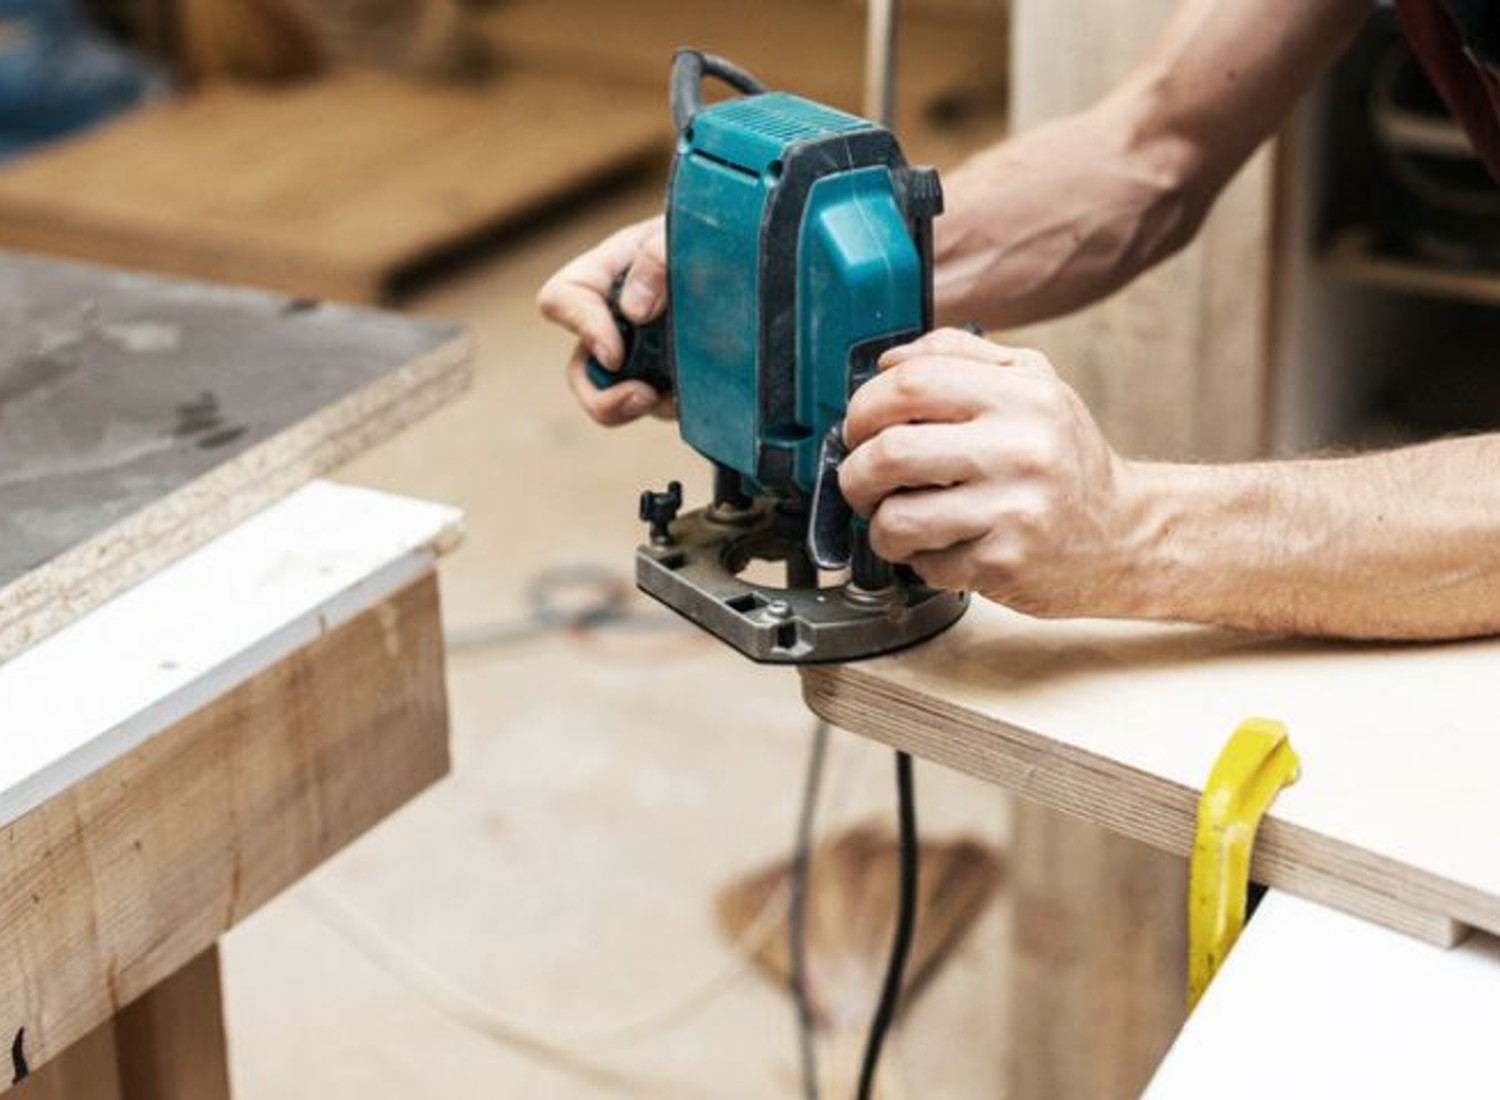 The Dremel Plunge Router, A Versatile Accessory From Your Dremel Rotary Tool !